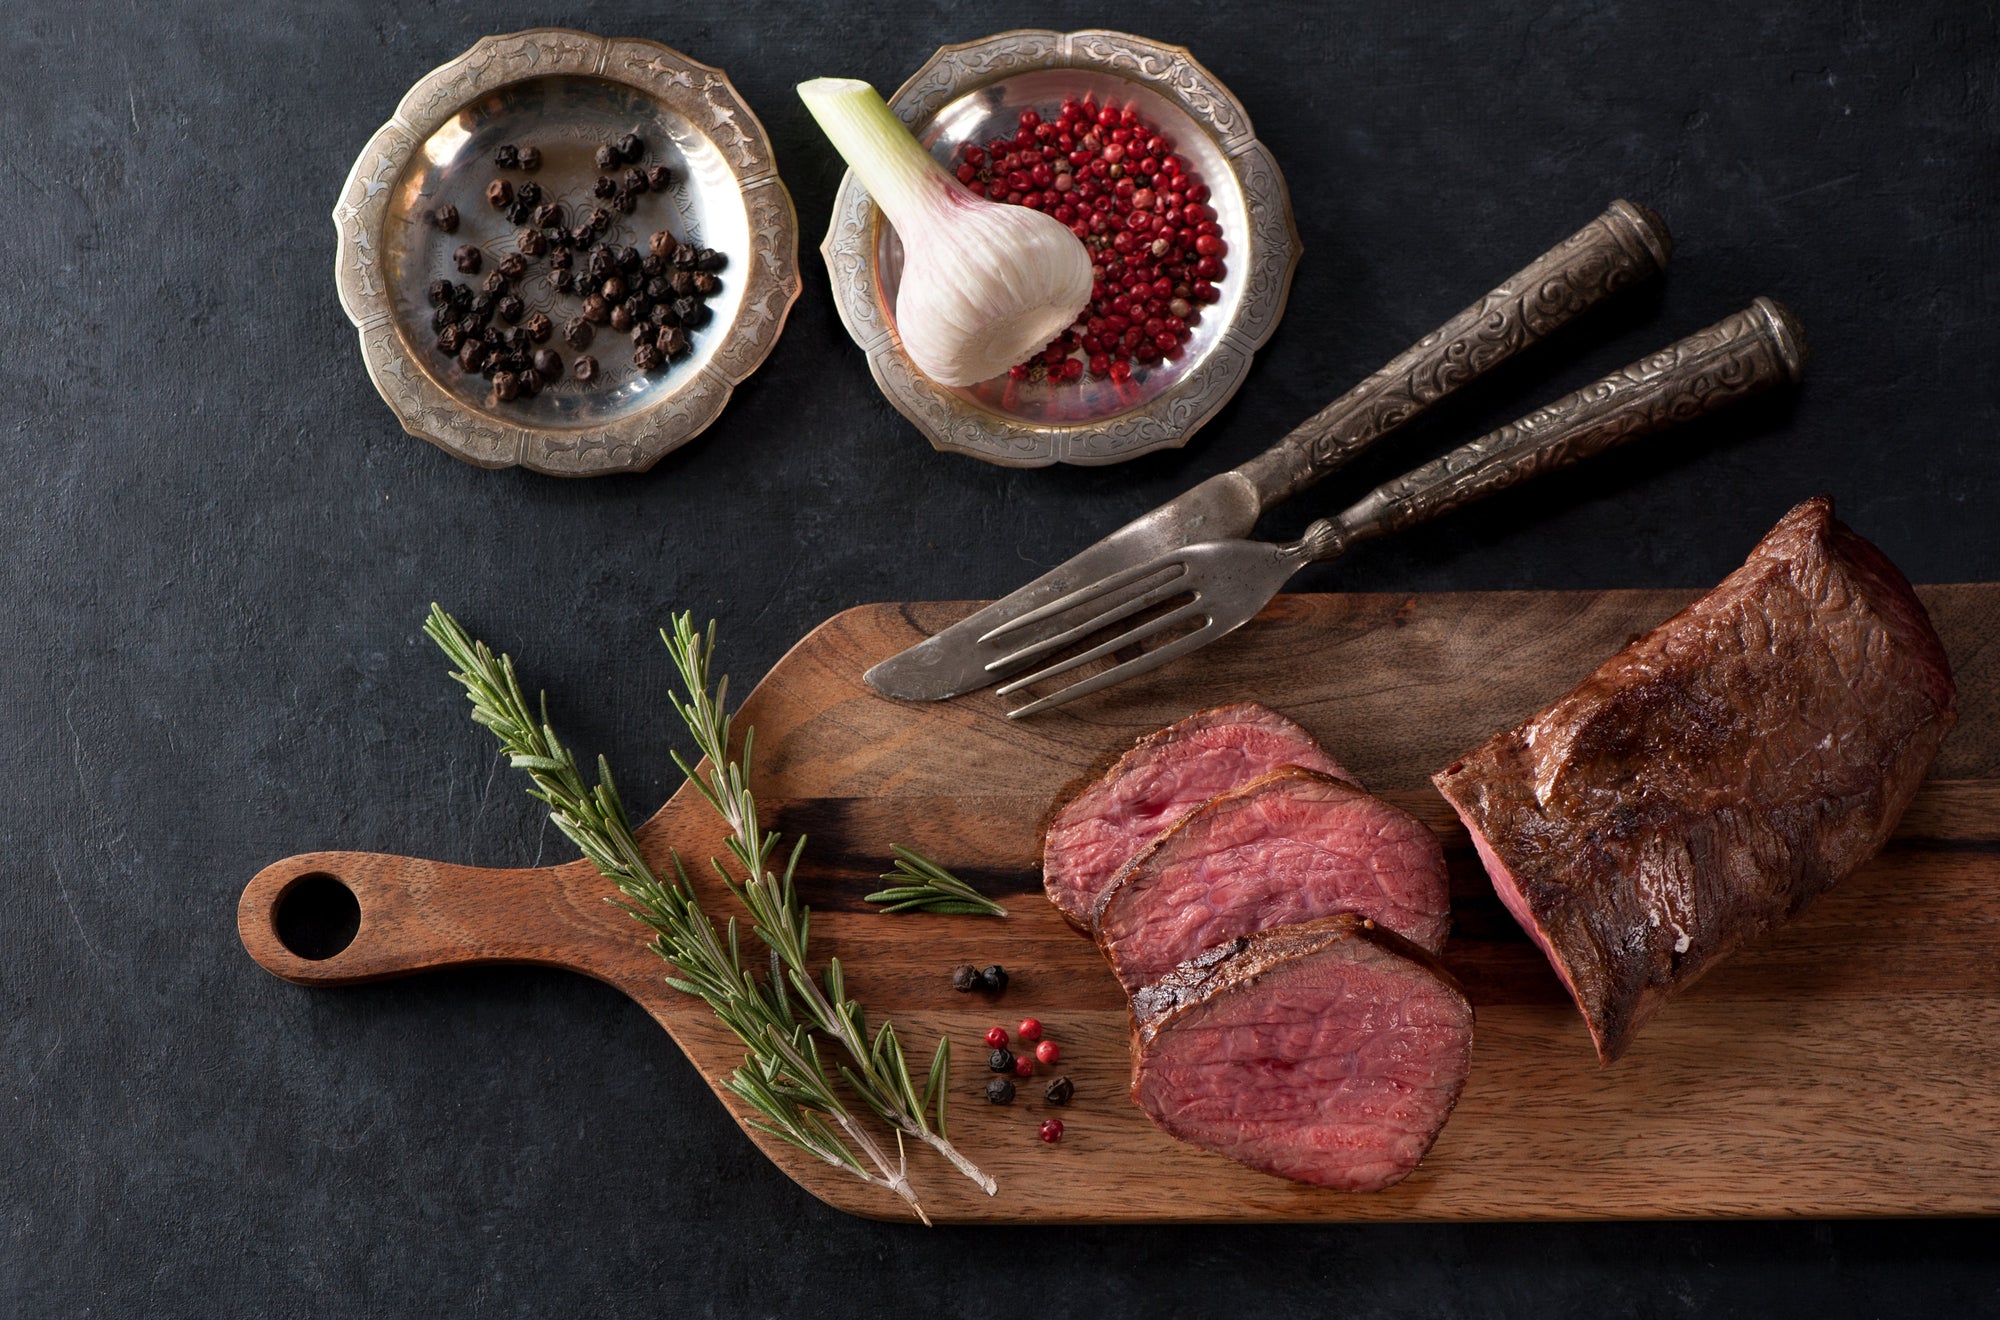 New Zealand Premium Grass-Fed Striploin (Sirloin) Steak | Aussie Meat | Meat Delivery | Kindness Matters | eat4charityHK | Wine & Beer Delivery | BBQ Grills | Weber Grills | Lotus Grills | Outdoor Patio Furnishing | Seafood Delivery | Butcher | VIPoints | Patio Heaters | Mist Fans